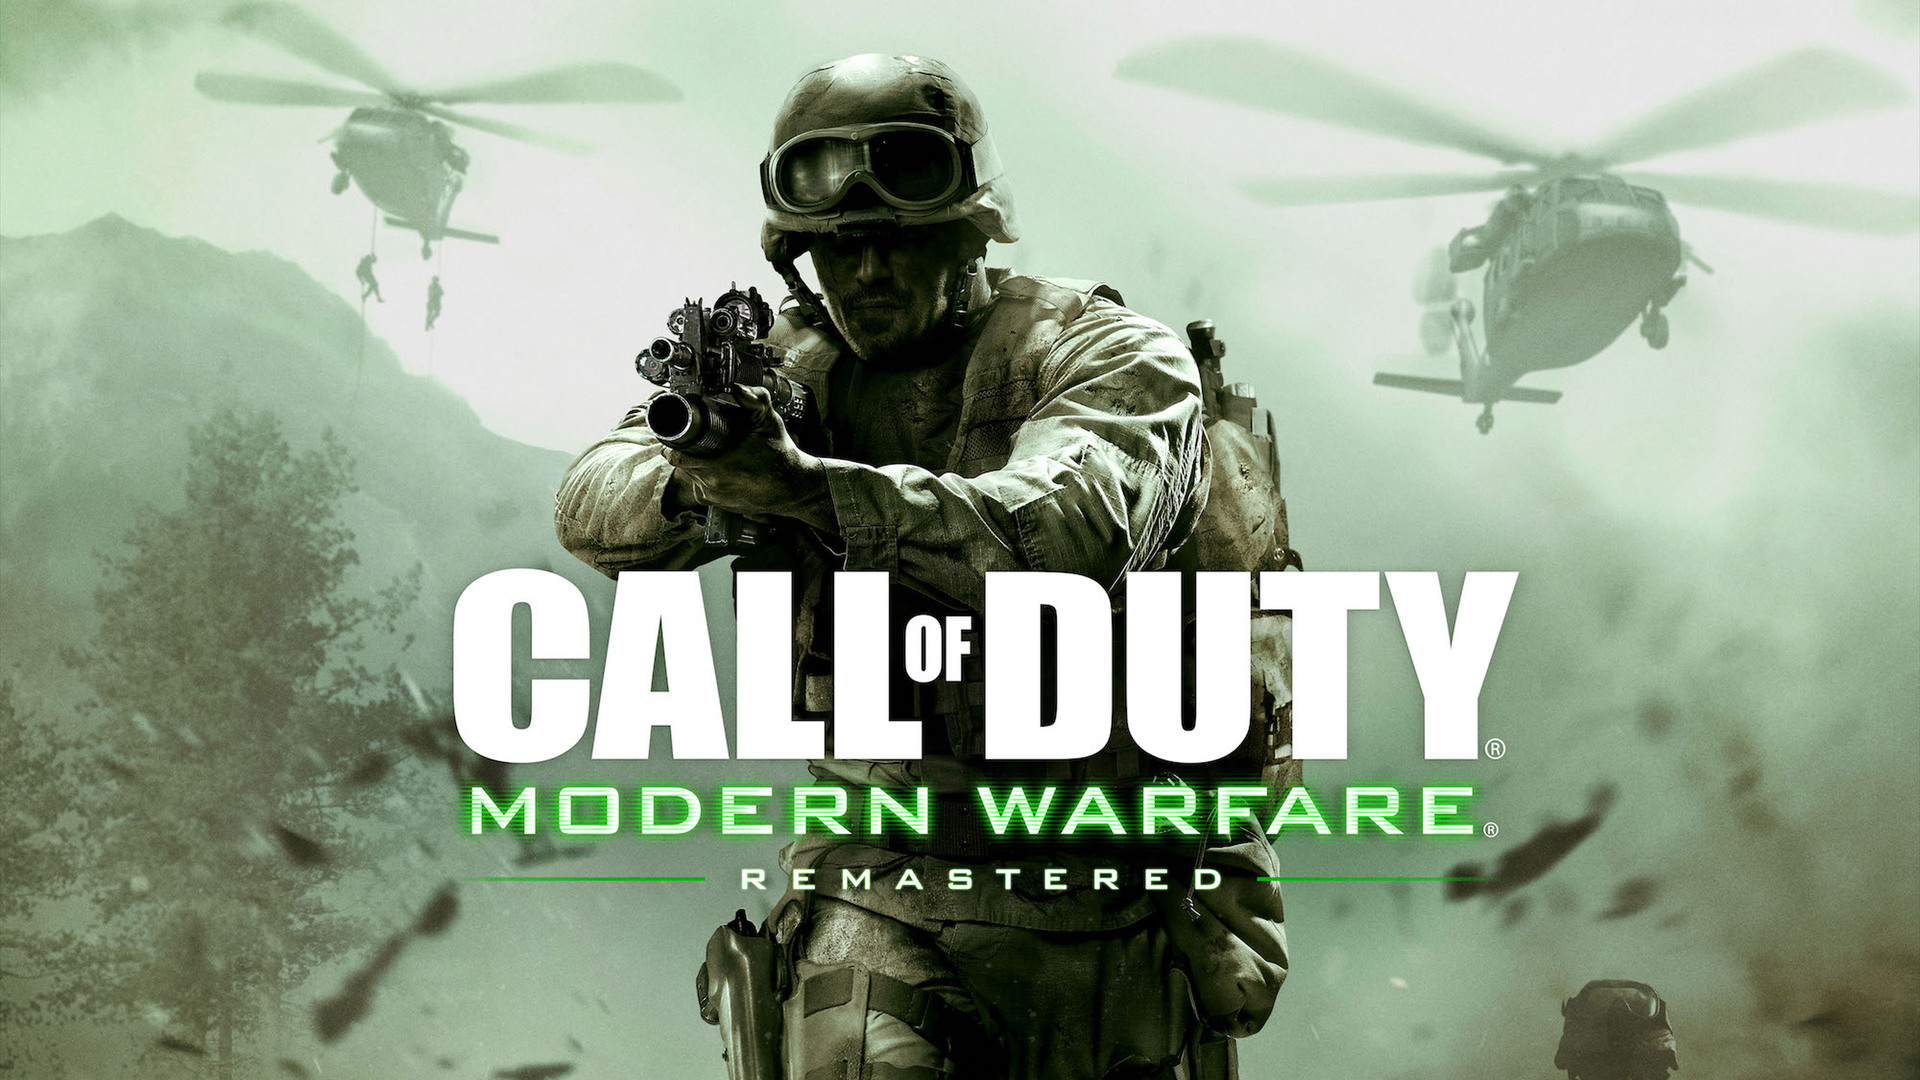 Let’s Play Call of Duty: Modern Warfare Remastered